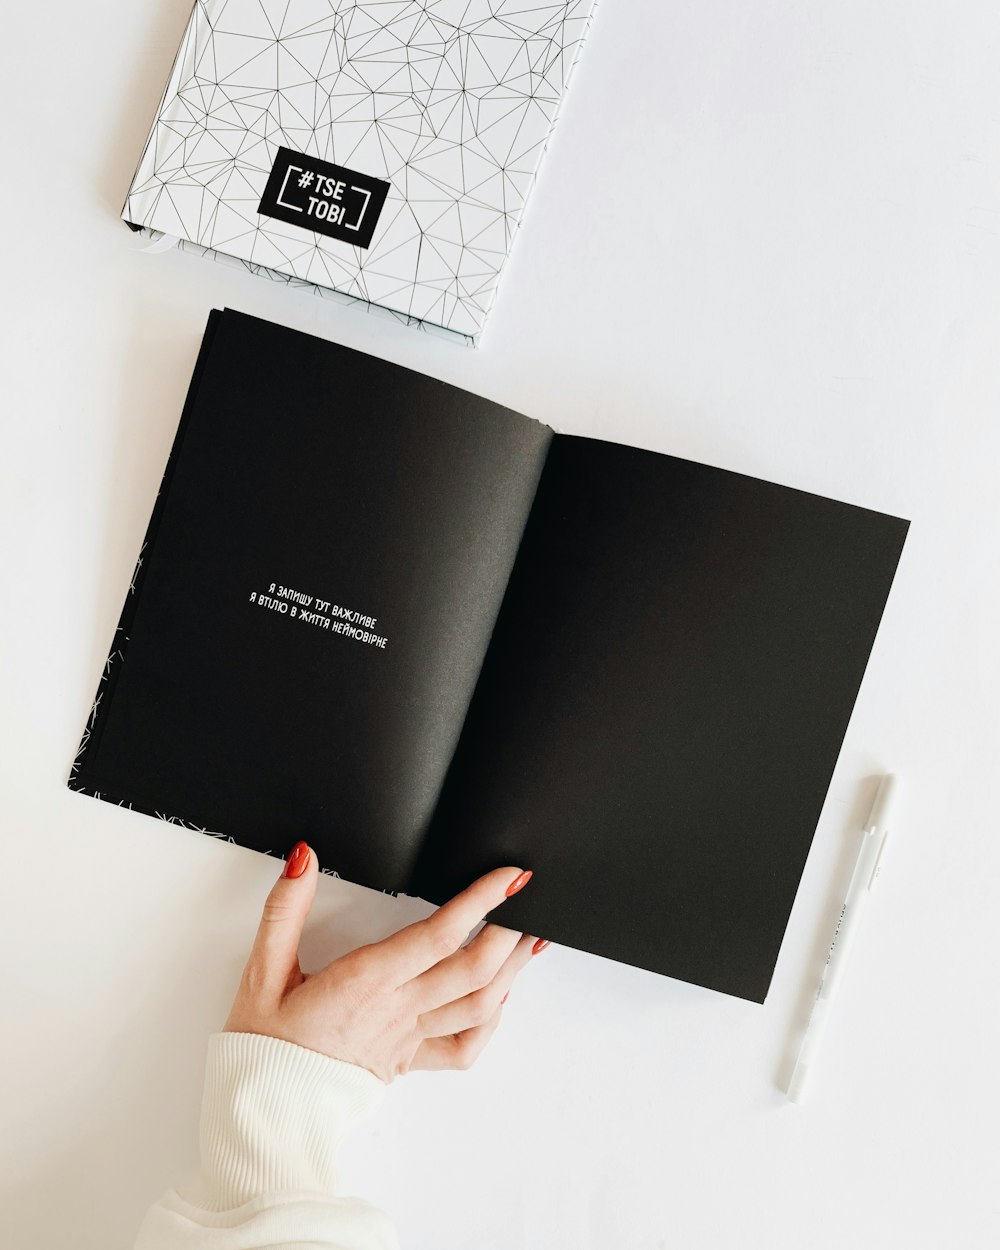 black book on white surface